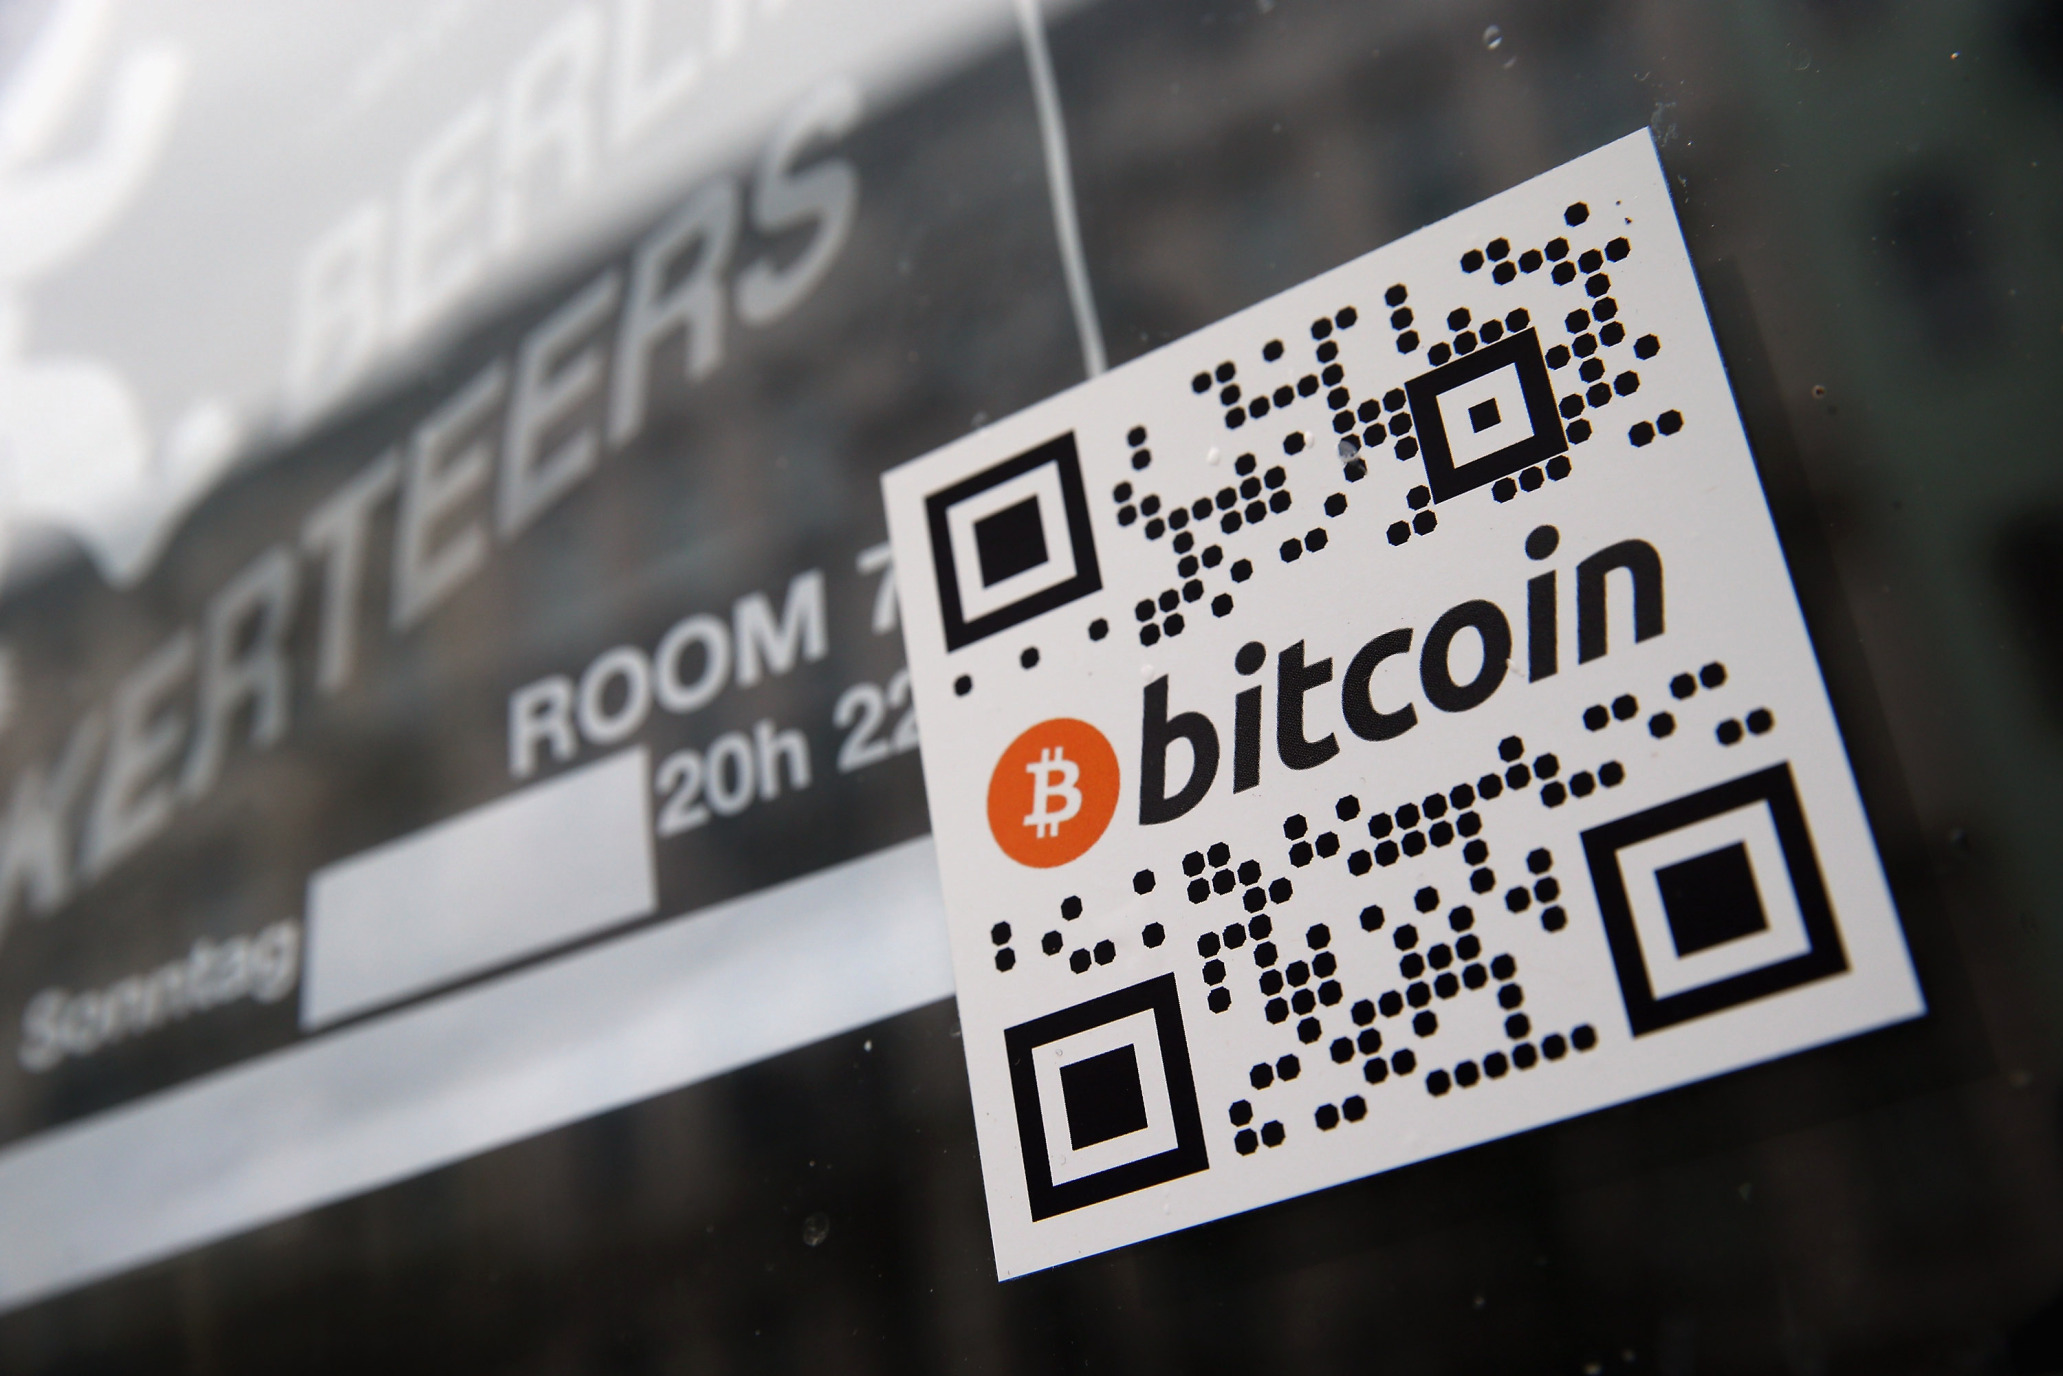 How to trace individual bitcoins? A new algorithm could reveal hidden patterns of Bitcoin money-laundering.